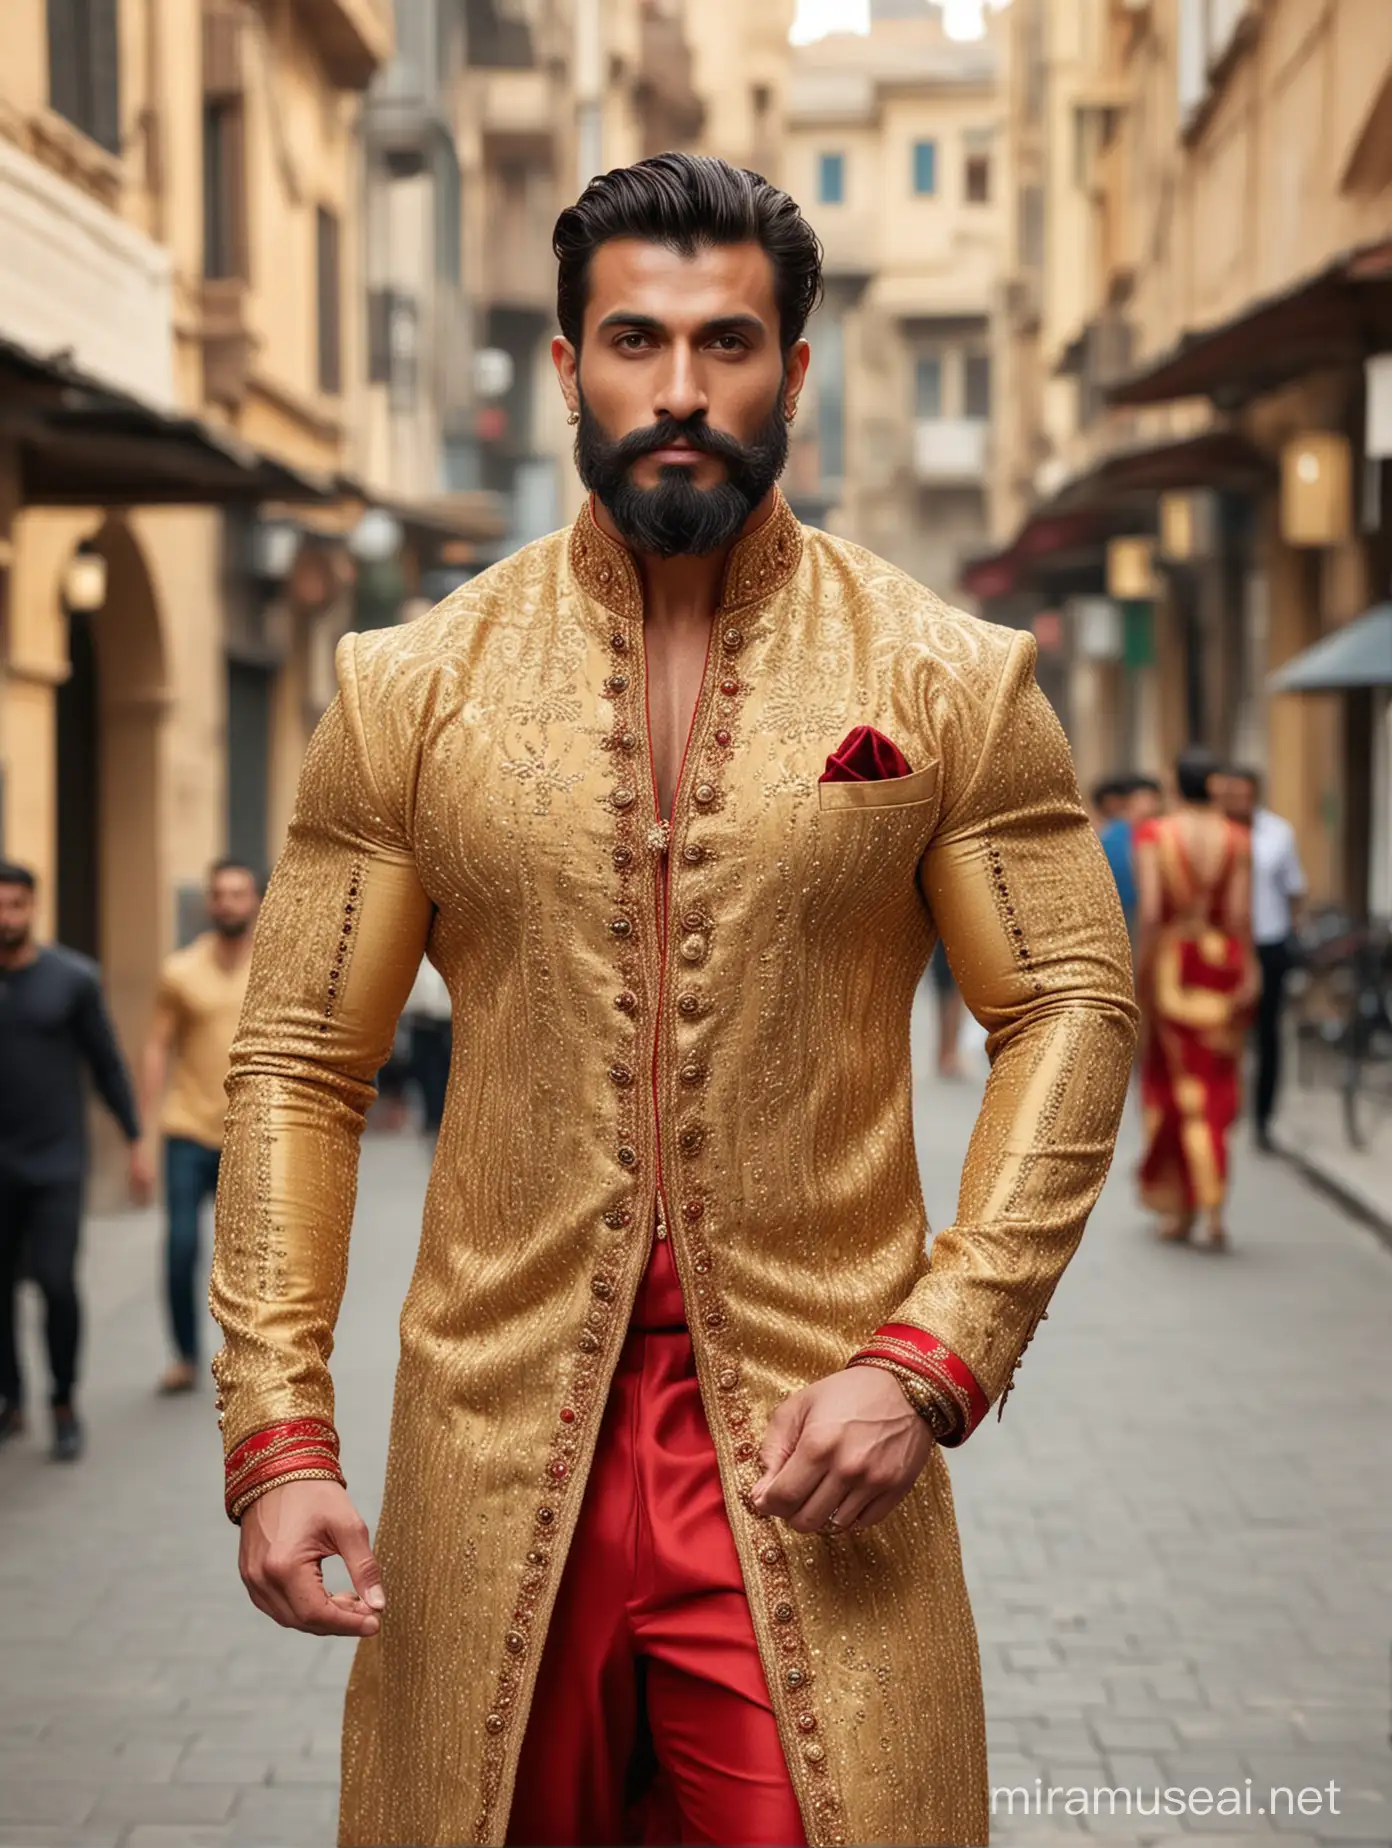 Tall and handsome bodybuilder men with beautiful hairstyle and beard with attractive eyes and Big wide shoulder and chest in designer golden and red sherwani with necklace and badges walking on street